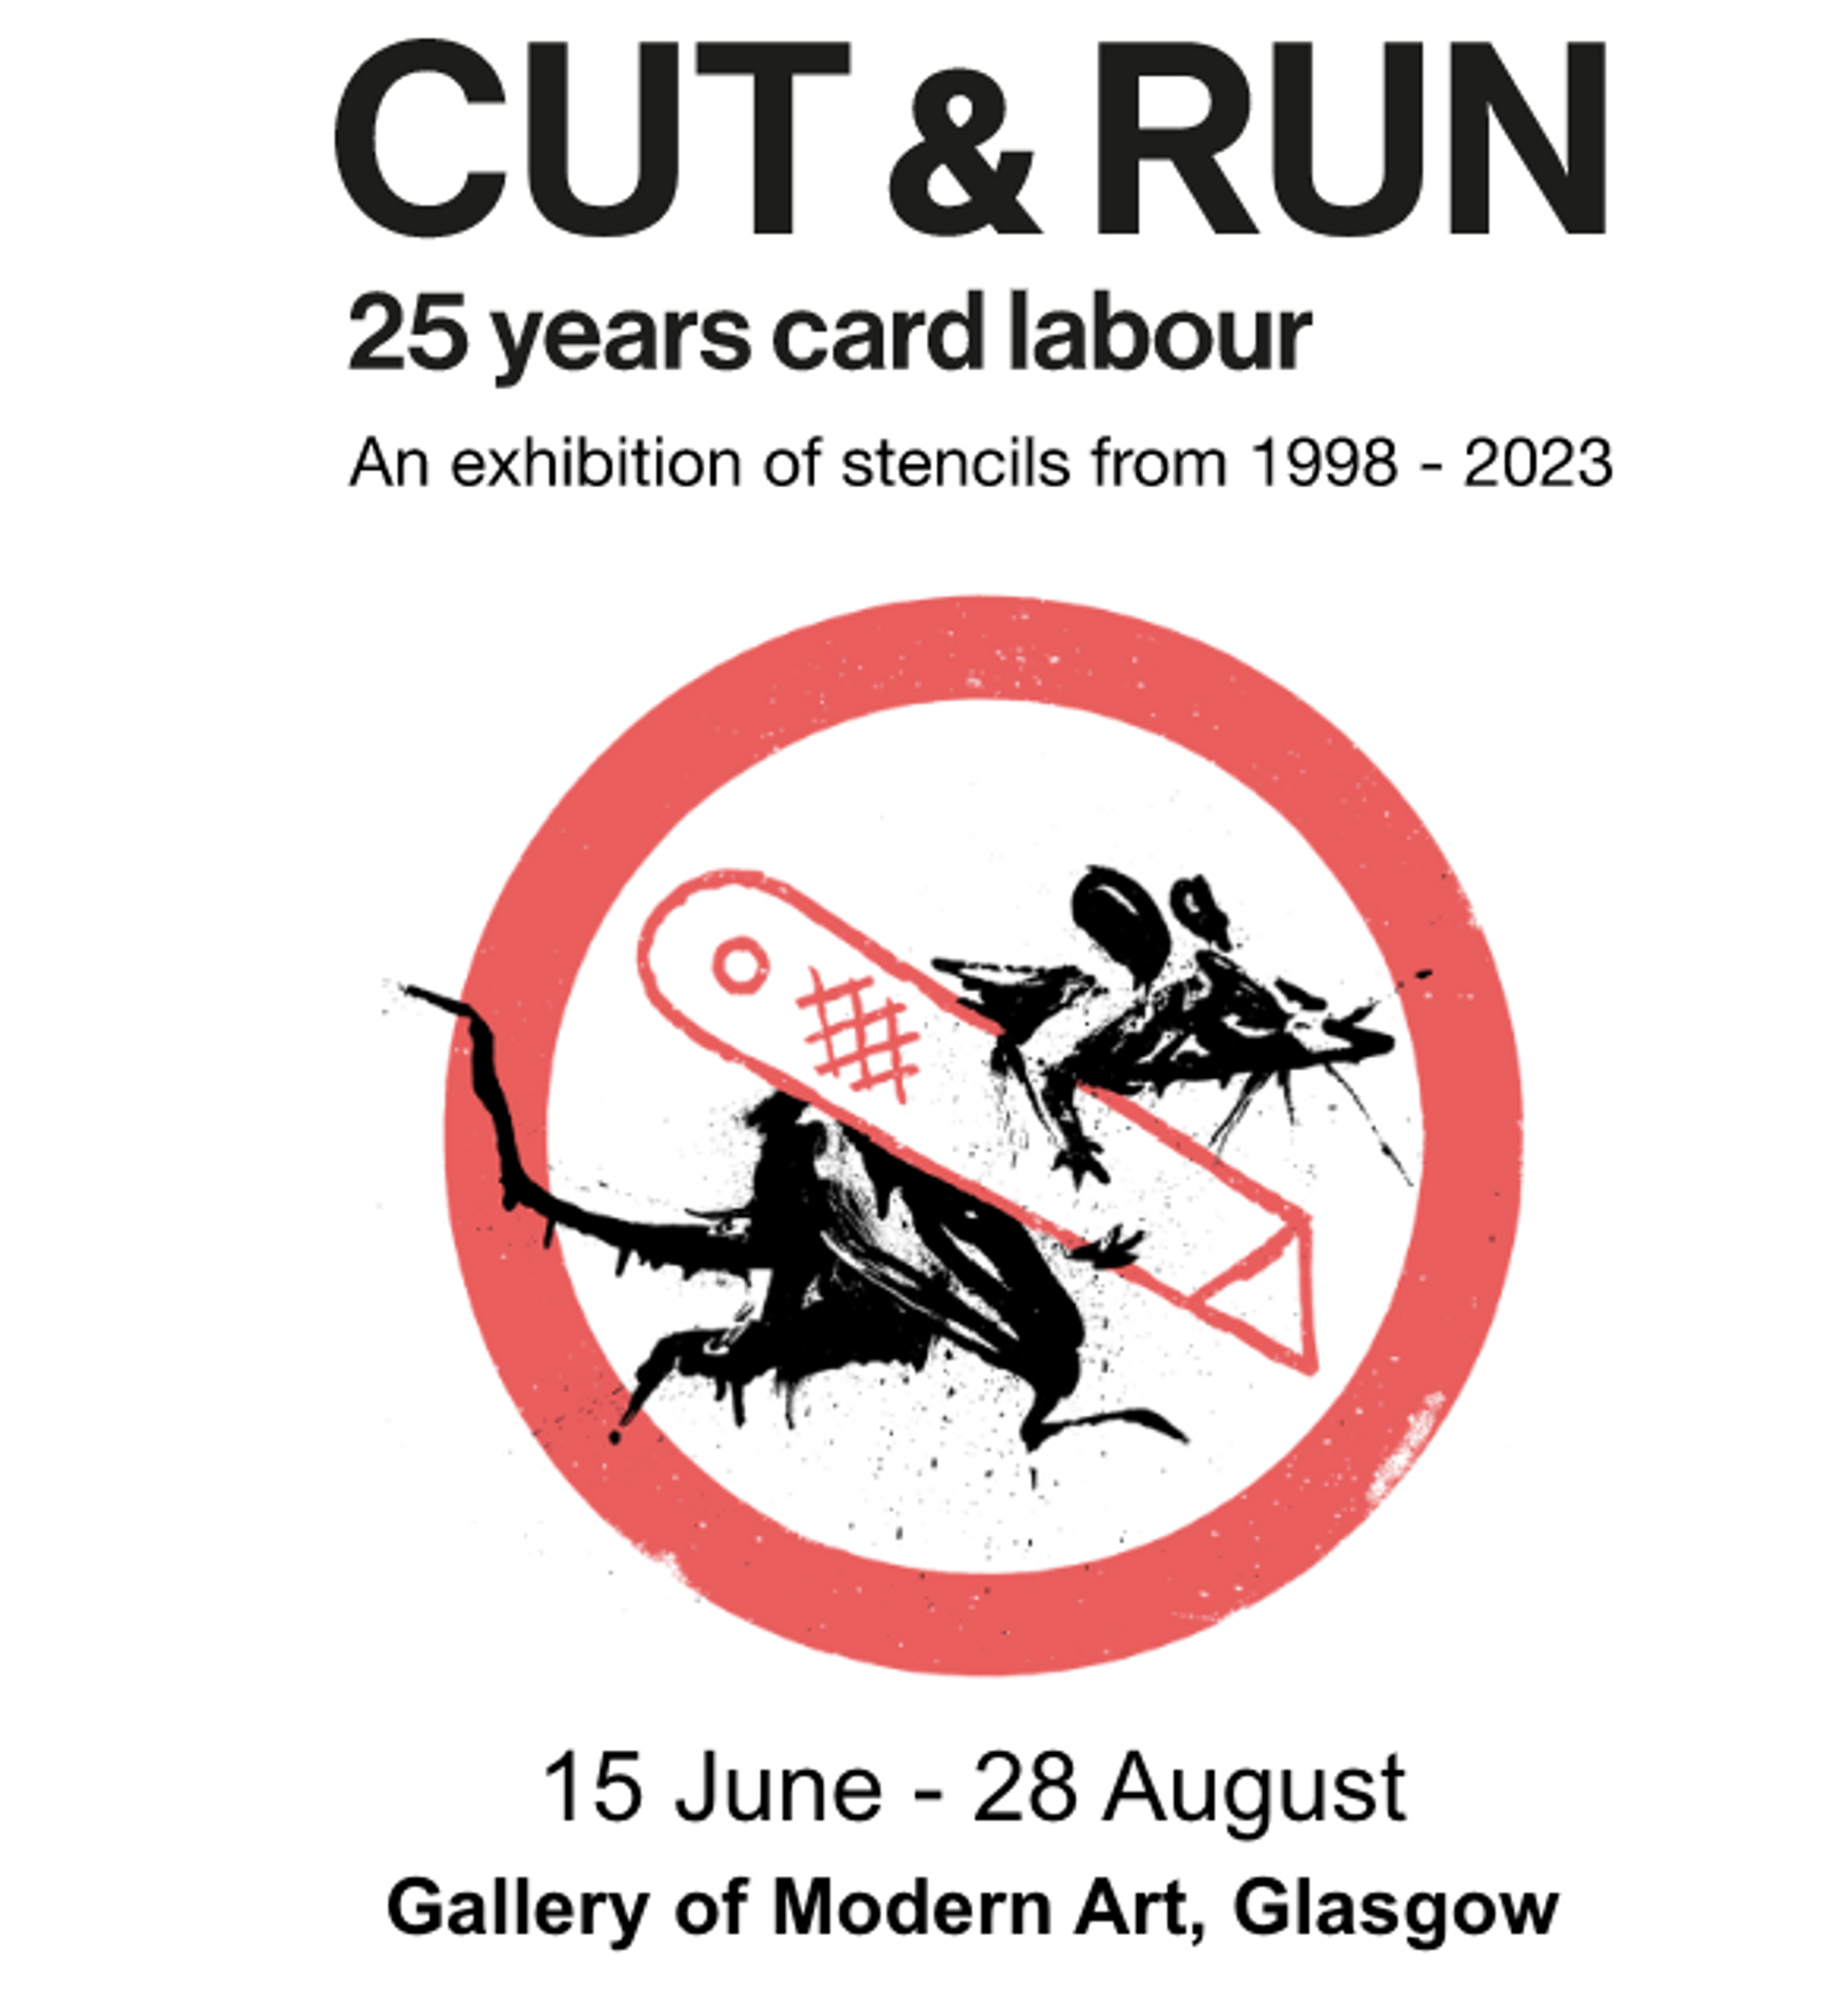 Flyer poster for Banksy's latest exhibition featuring a stenciled rat running with a razor blade tucked under its arm. The rat is enclosed in a red circle, symbolizing the authorized status of the exhibition. Image copyrighted by Cut & Run and Banksy, 2023